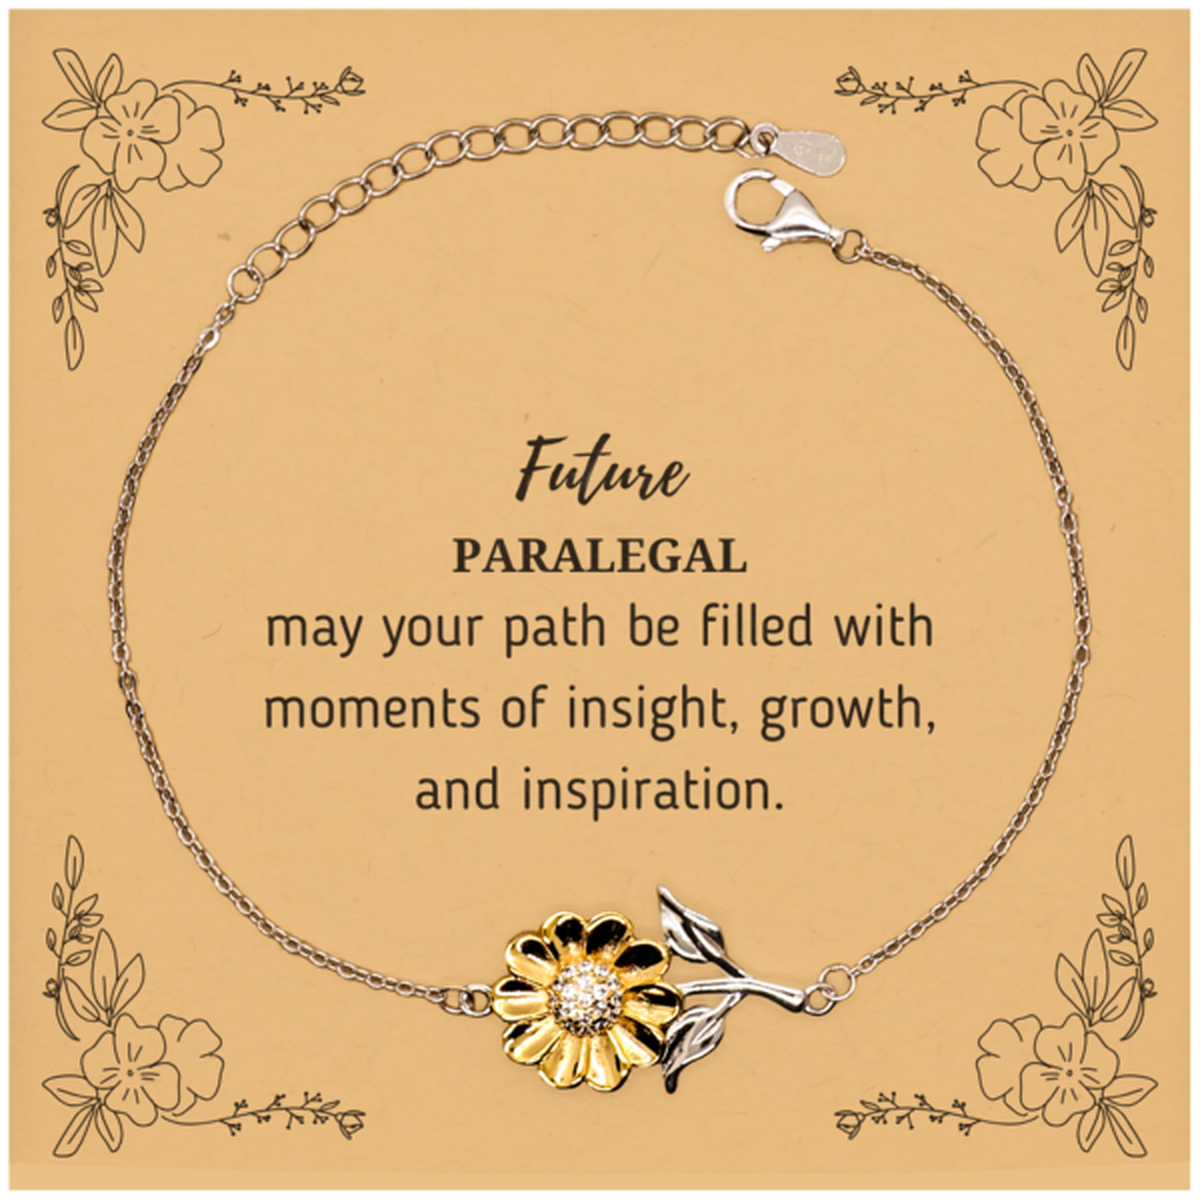 Future Paralegal Gifts, May your path be filled with moments of insight, Graduation Gifts for New Paralegal, Christmas Unique Sunflower Bracelet For Men, Women, Friends